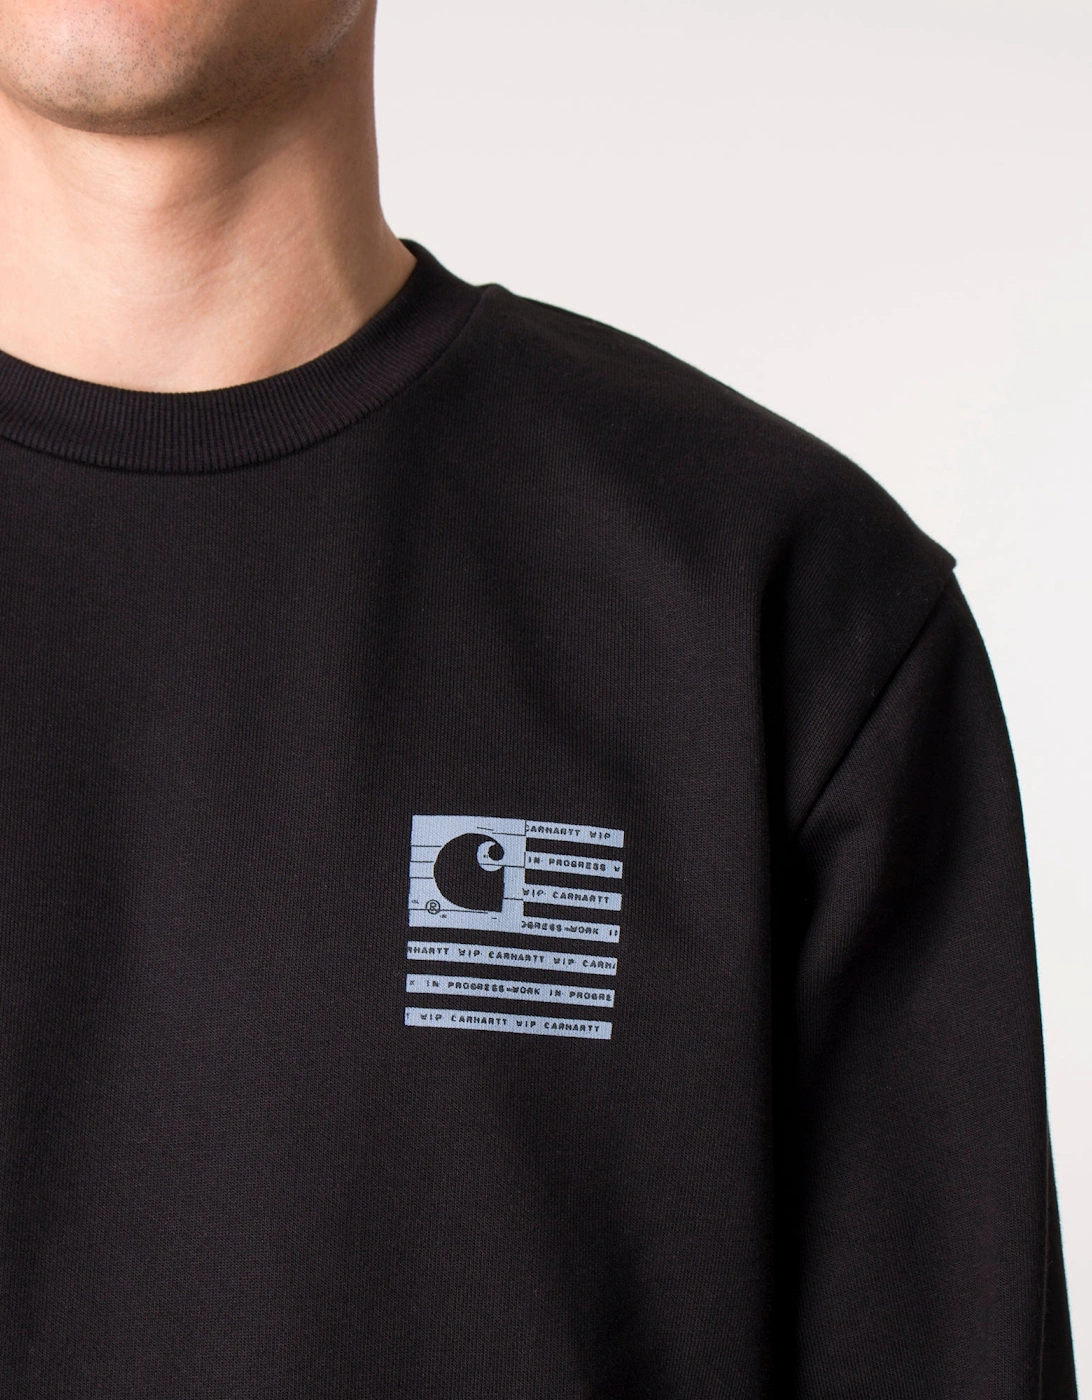 Relaxed Fit Label State Flag Sweatshirt